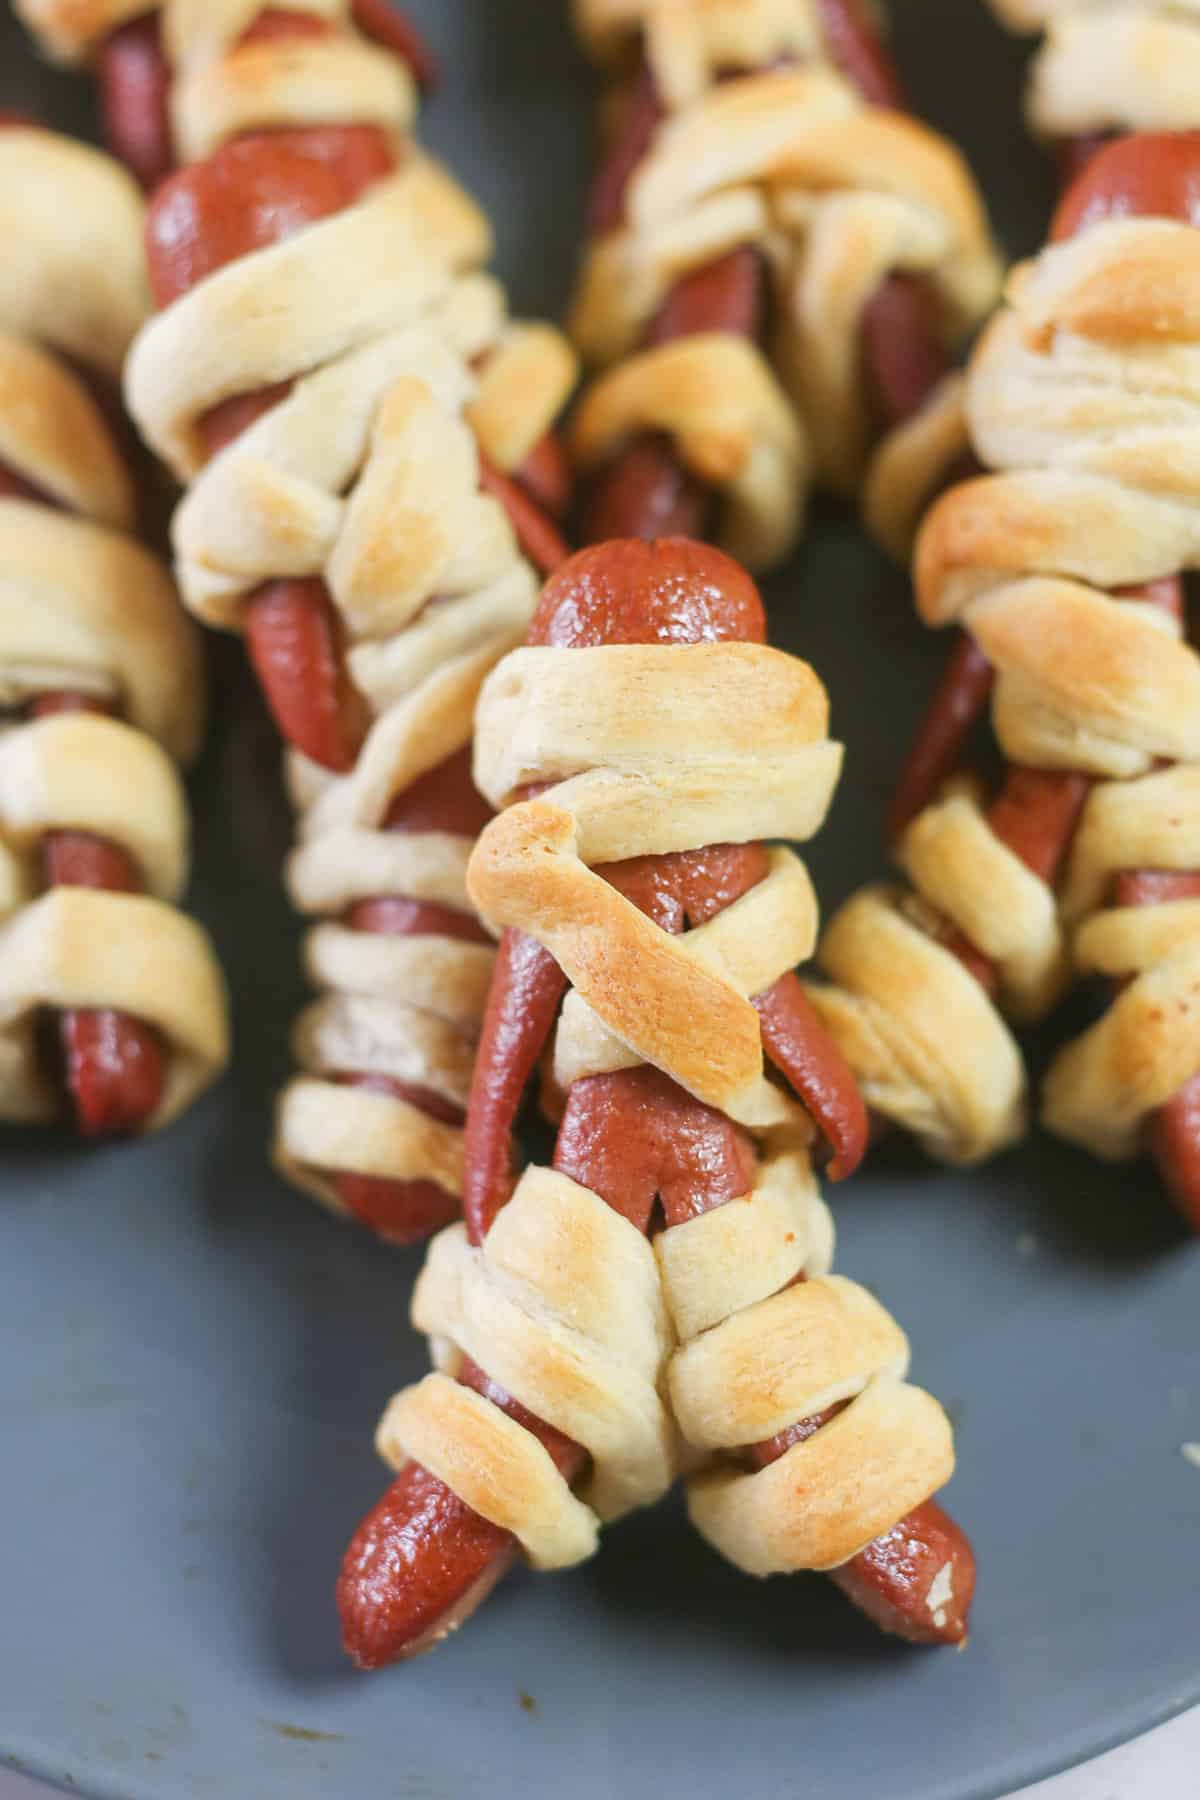 Mummy hot dogs on a plate.